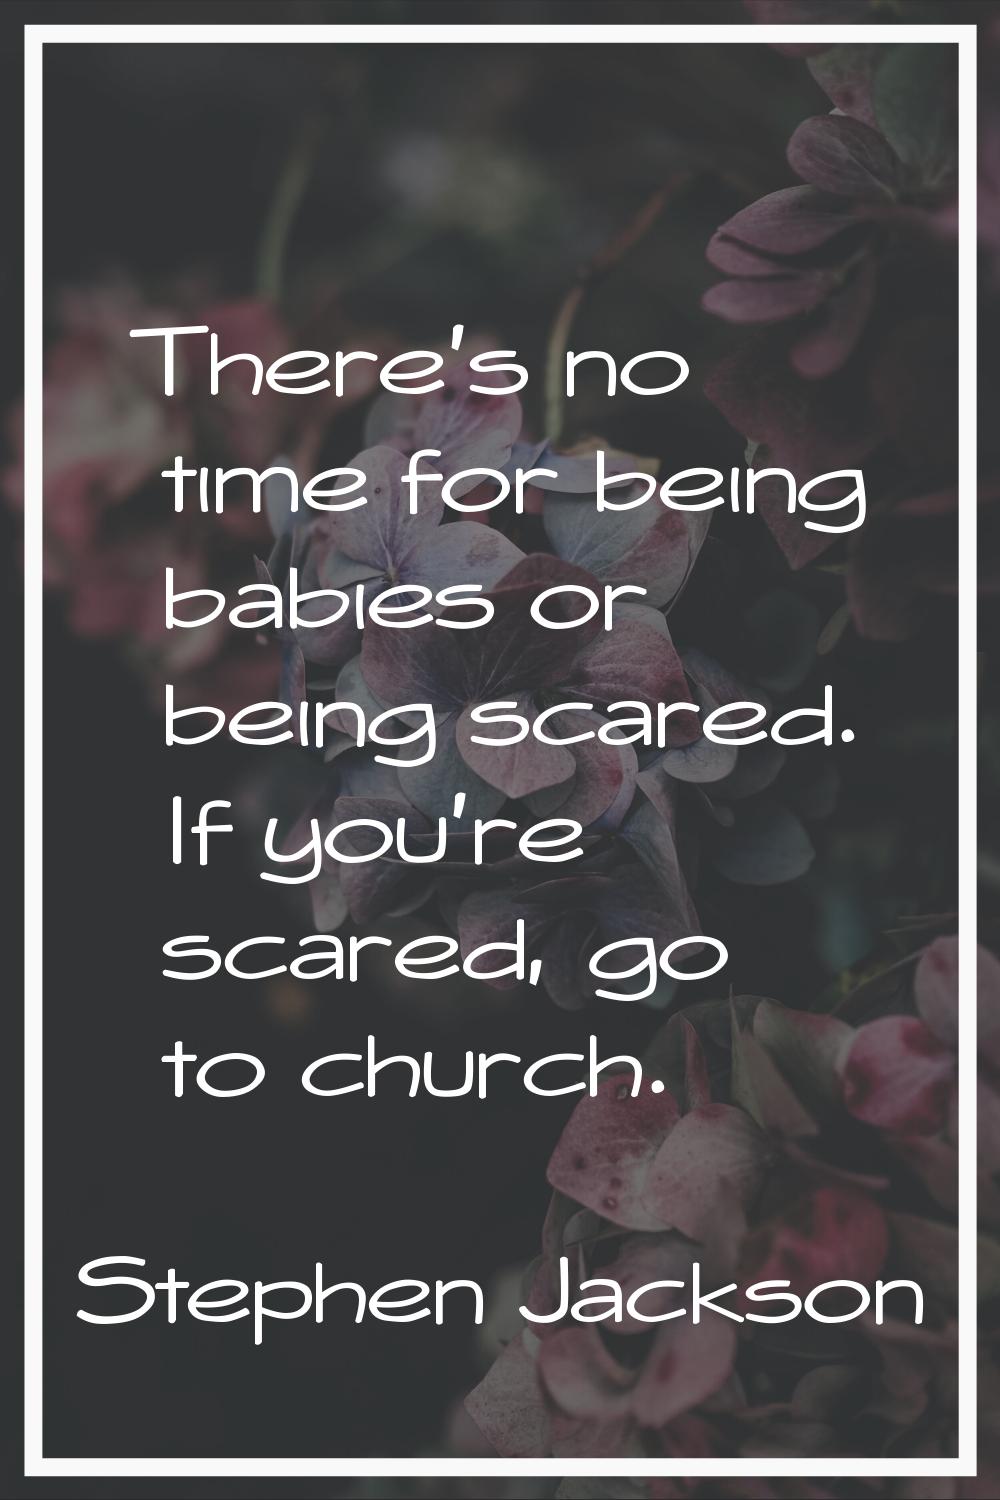 There's no time for being babies or being scared. If you're scared, go to church.